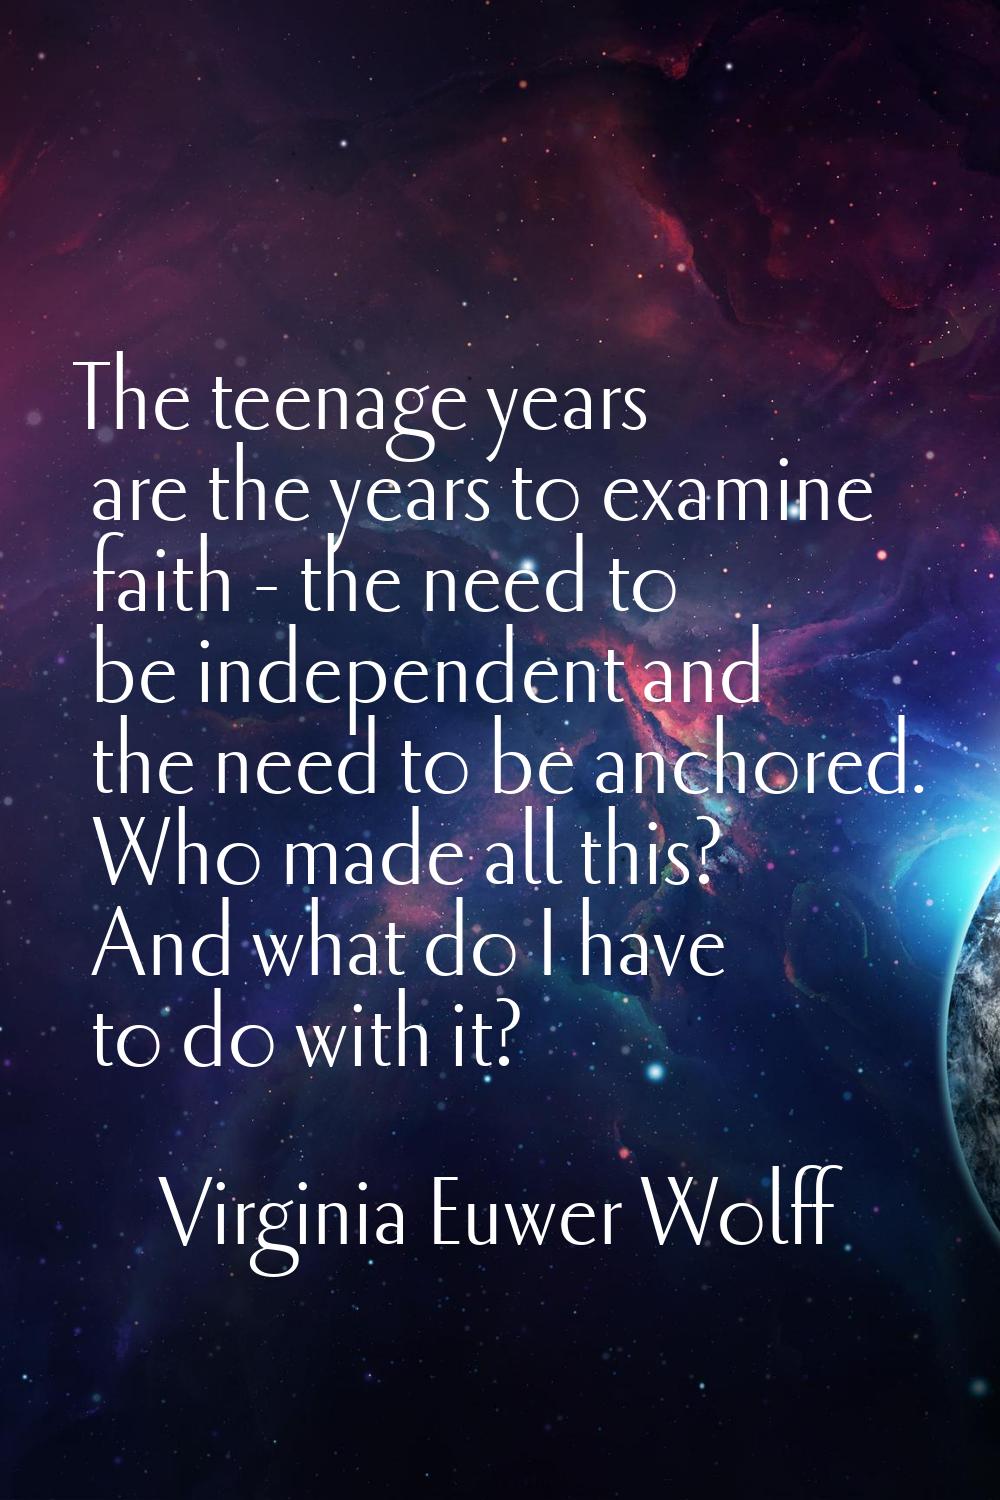 The teenage years are the years to examine faith - the need to be independent and the need to be an